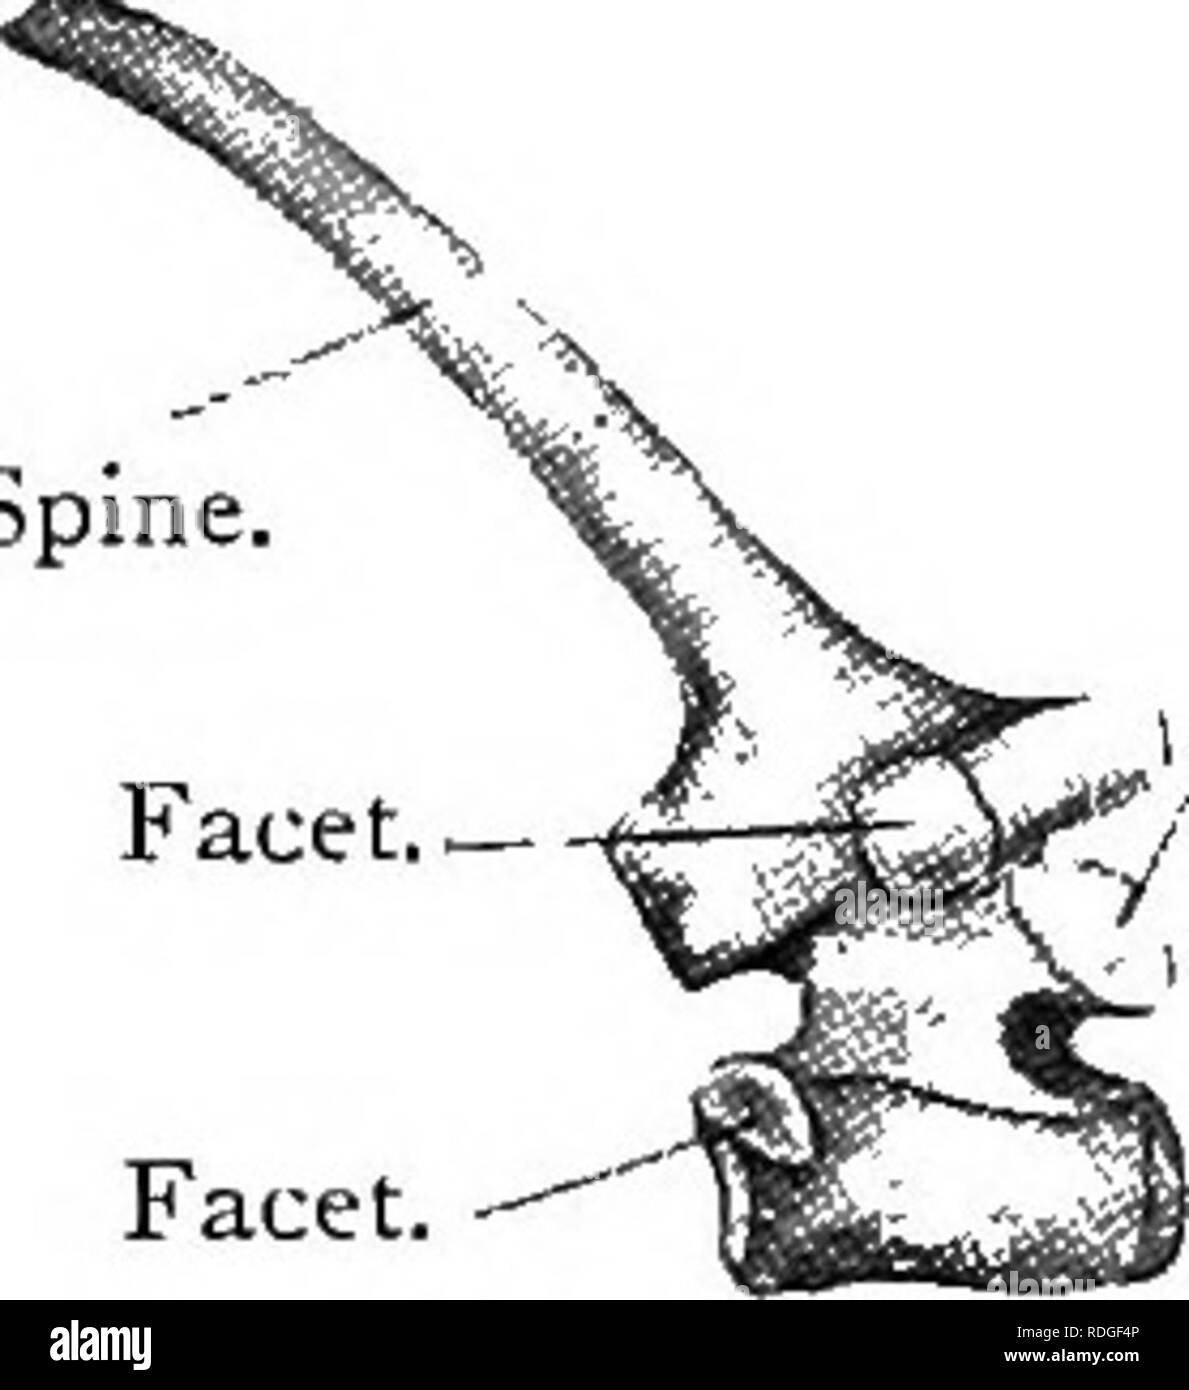 . Elementary text-book of zoology. 396 CHORD AT A. small centrum and two hollow facets for the occipital condyles of the skull. The second or axis has a peg-like odontoid process which belongs by origin to the atlas. The other five have low neural spines and short centra. All the cervical vertebrae have vertebrarterial canals, produced by fusion of cervical ribs, as in the pigeon. The thoracic veriebrce are twelve. All have long neural spines. The rib has in each case a capitulum articulating between the centra of o. tIJIac^^-V^k™^^ o^^lBBn.. two vertebra, and. a (Adnat.) tuoerculum articulatm Stock Photo